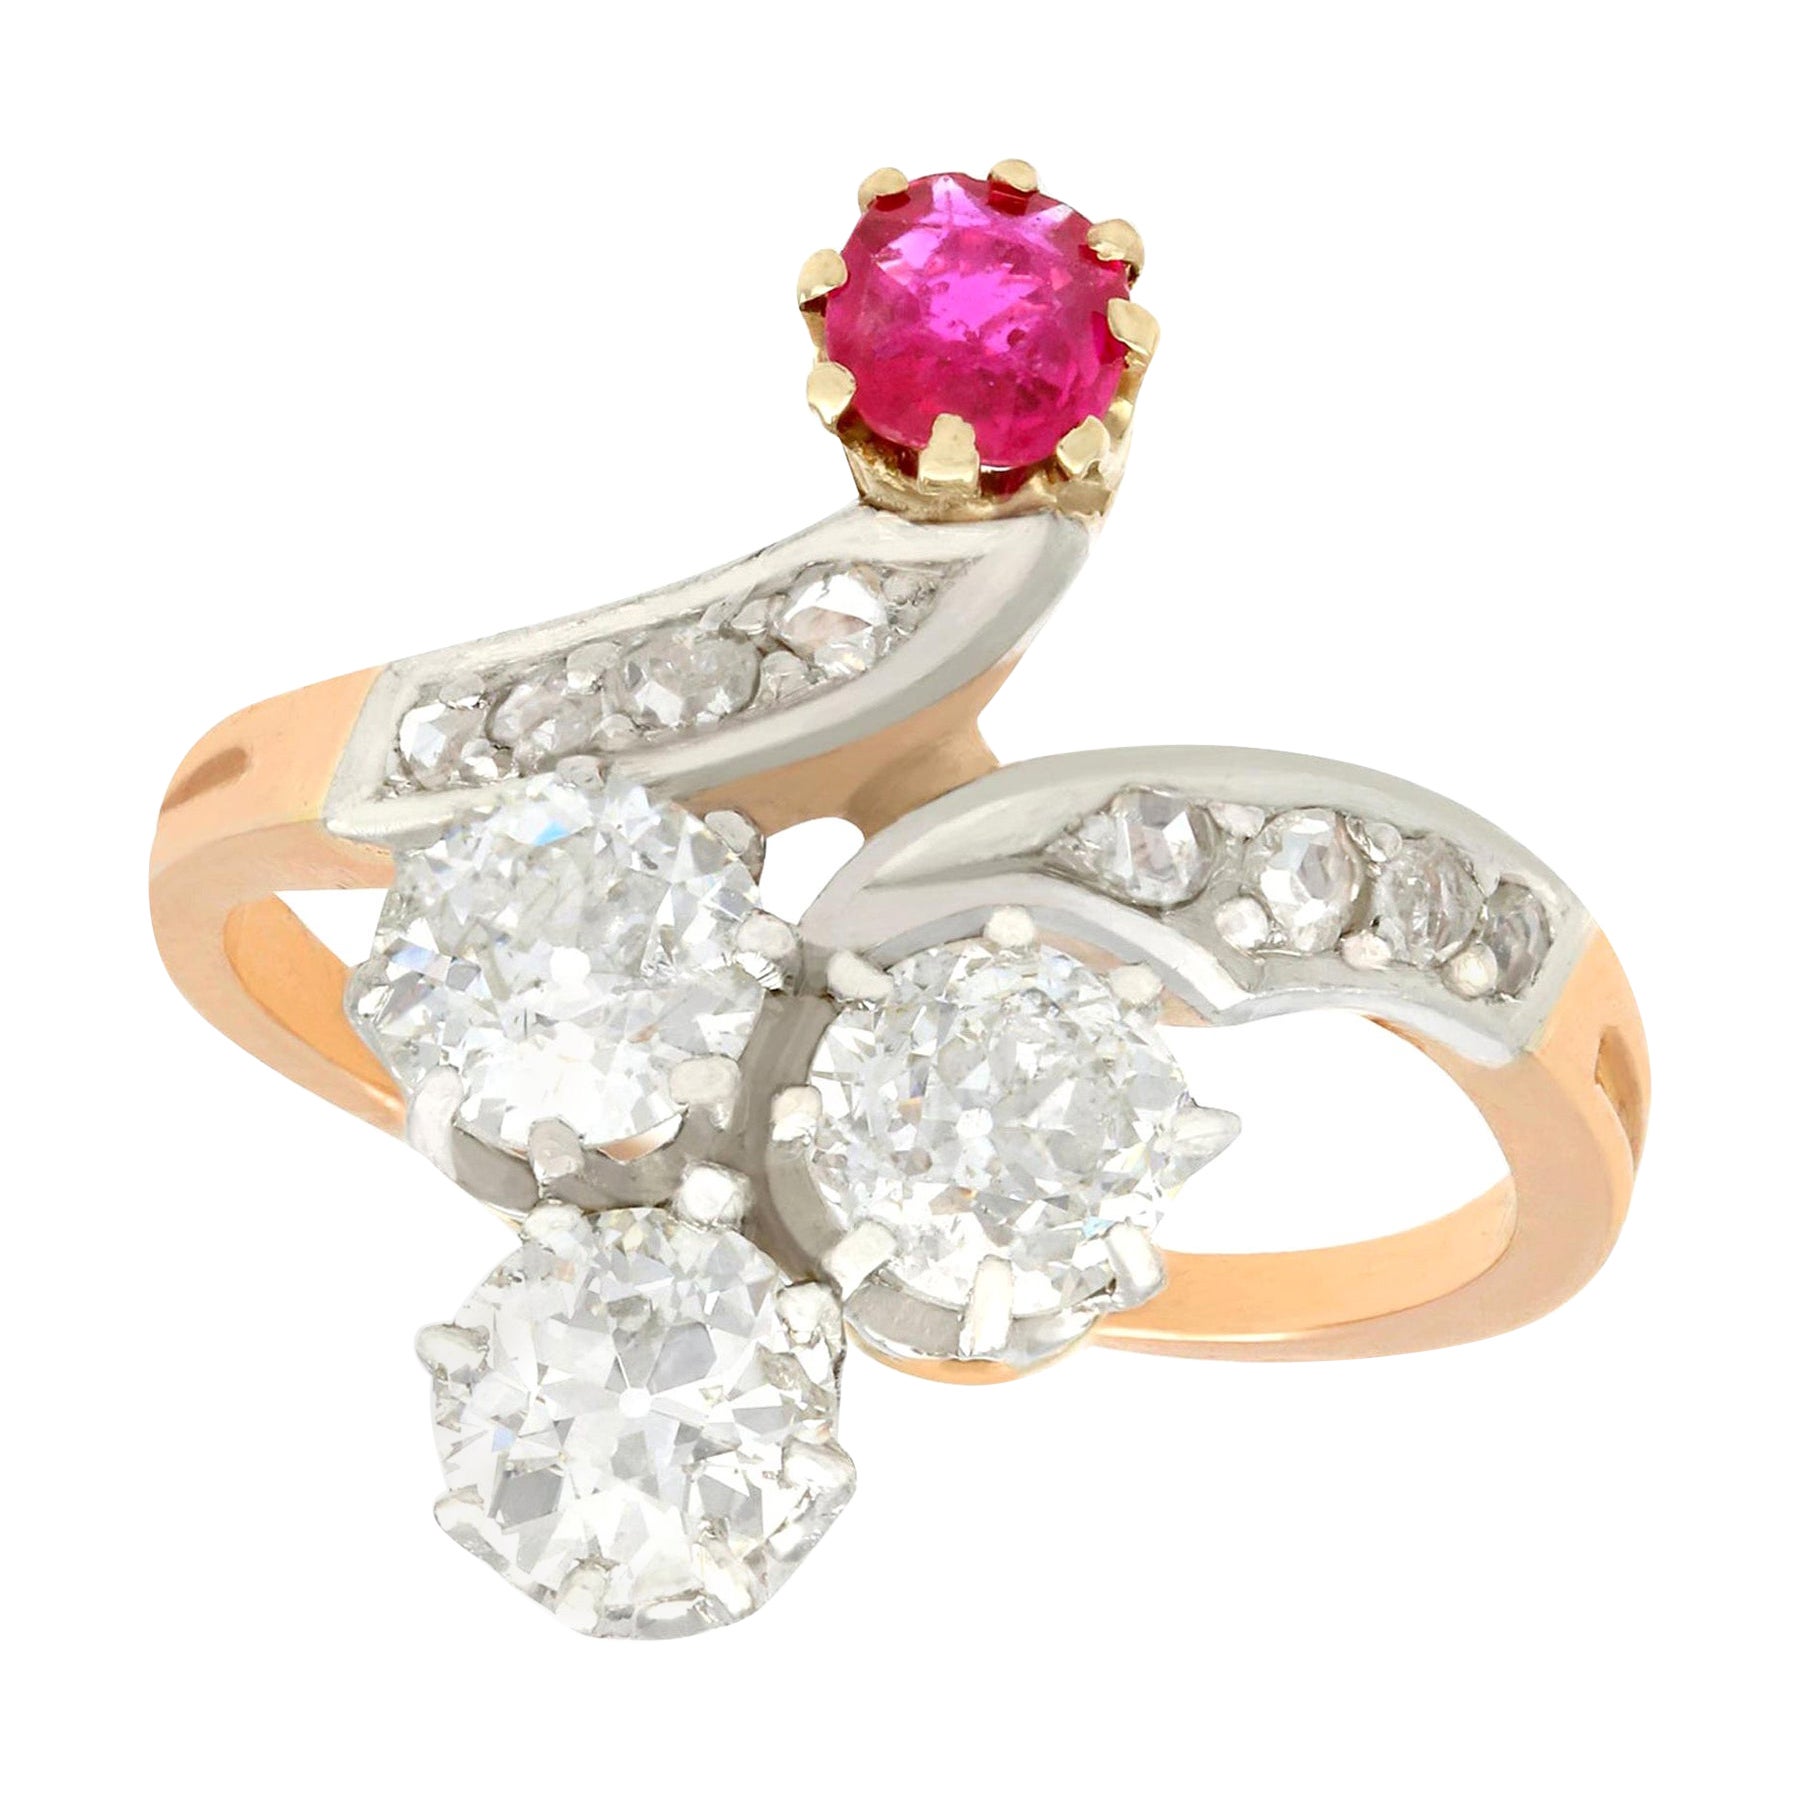 Antique French 1.71 Carat Diamond and Ruby Yellow Gold Twist Ring